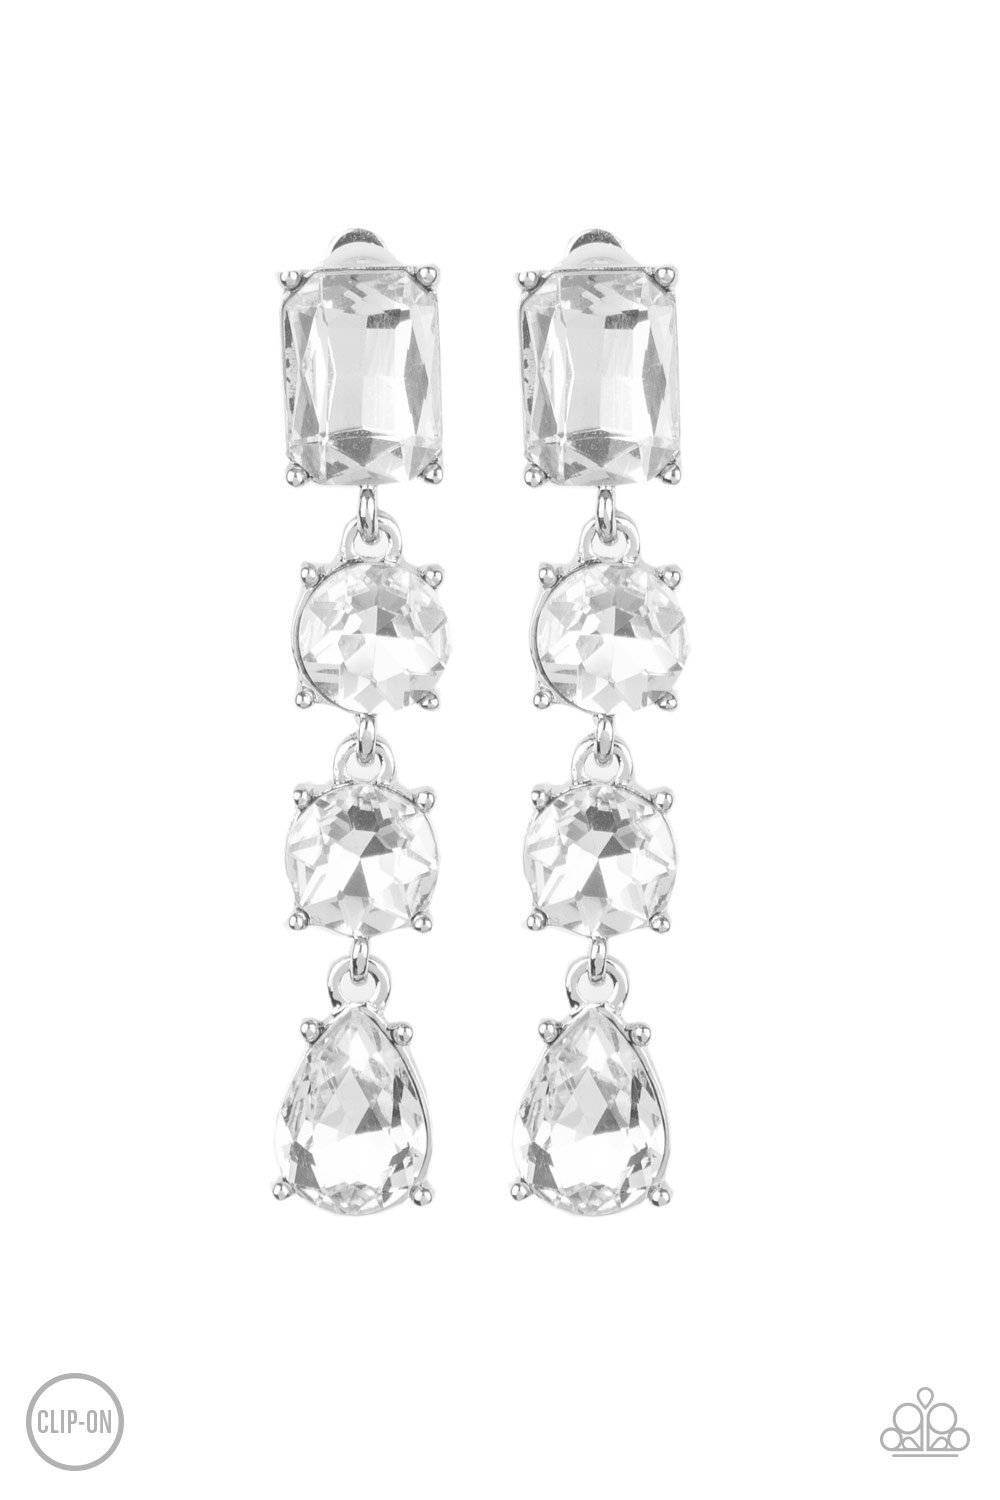 D78 - Make A-LIST White Clip-On Earrings by Paparazzi Accessories on Fancy5Fashion.com